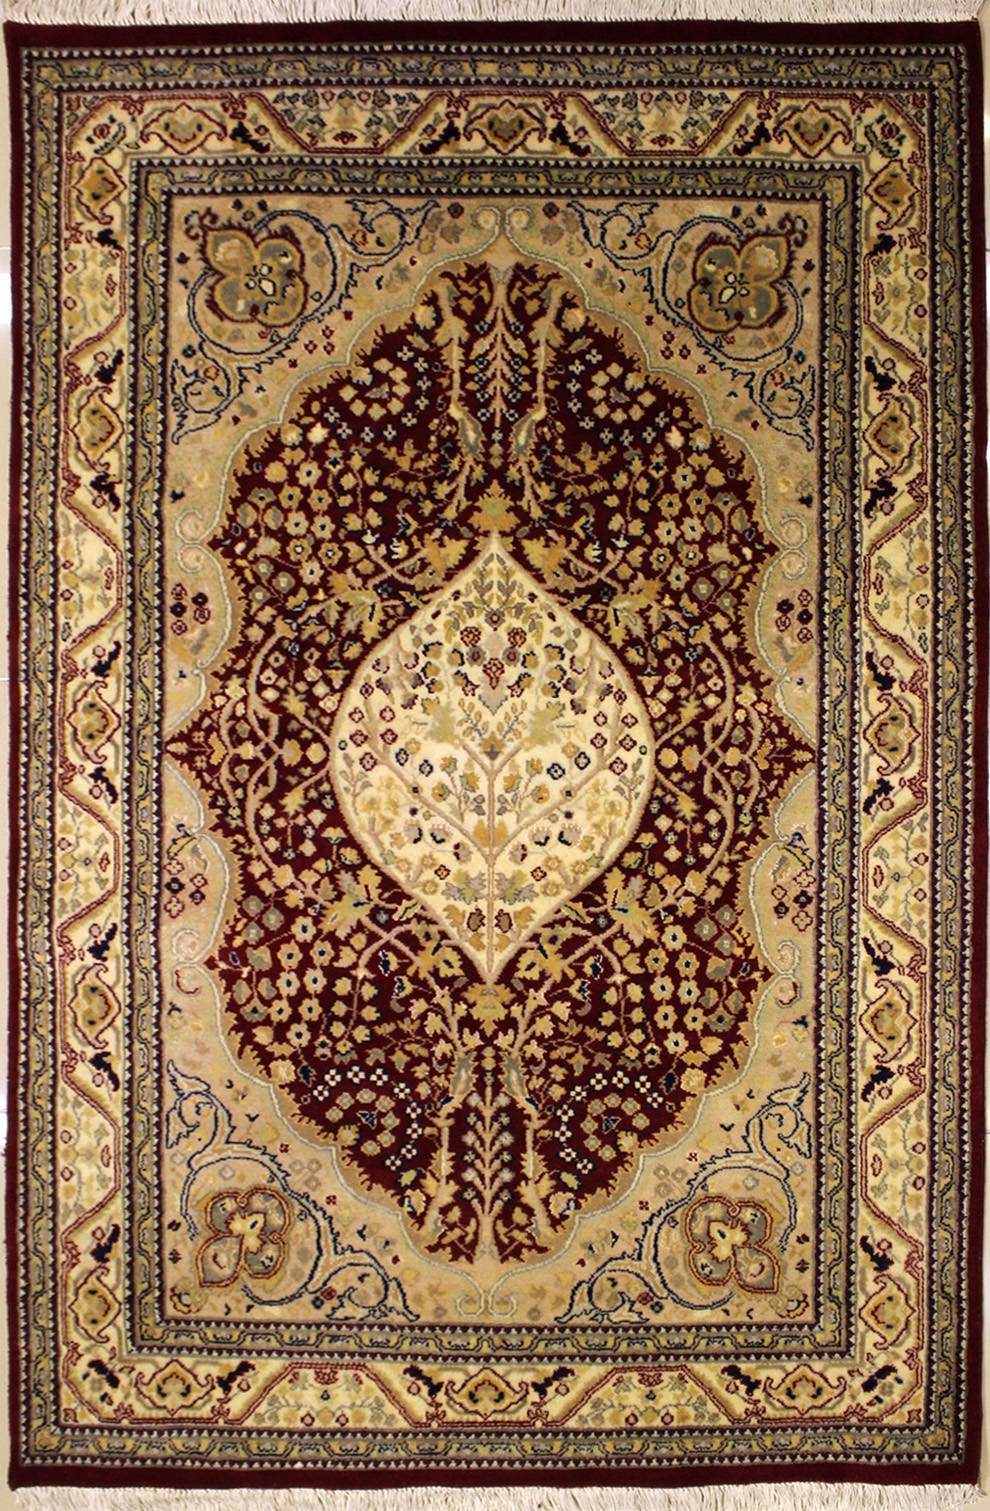 100% Original Hand-Knotted in Gold,White,Green Colors Floral Design RugsTC 4'0 x 6'4 Pak Persian Area Rug with Silk & Wool Pile a 4x6 Rectangular Double Knot Rug 